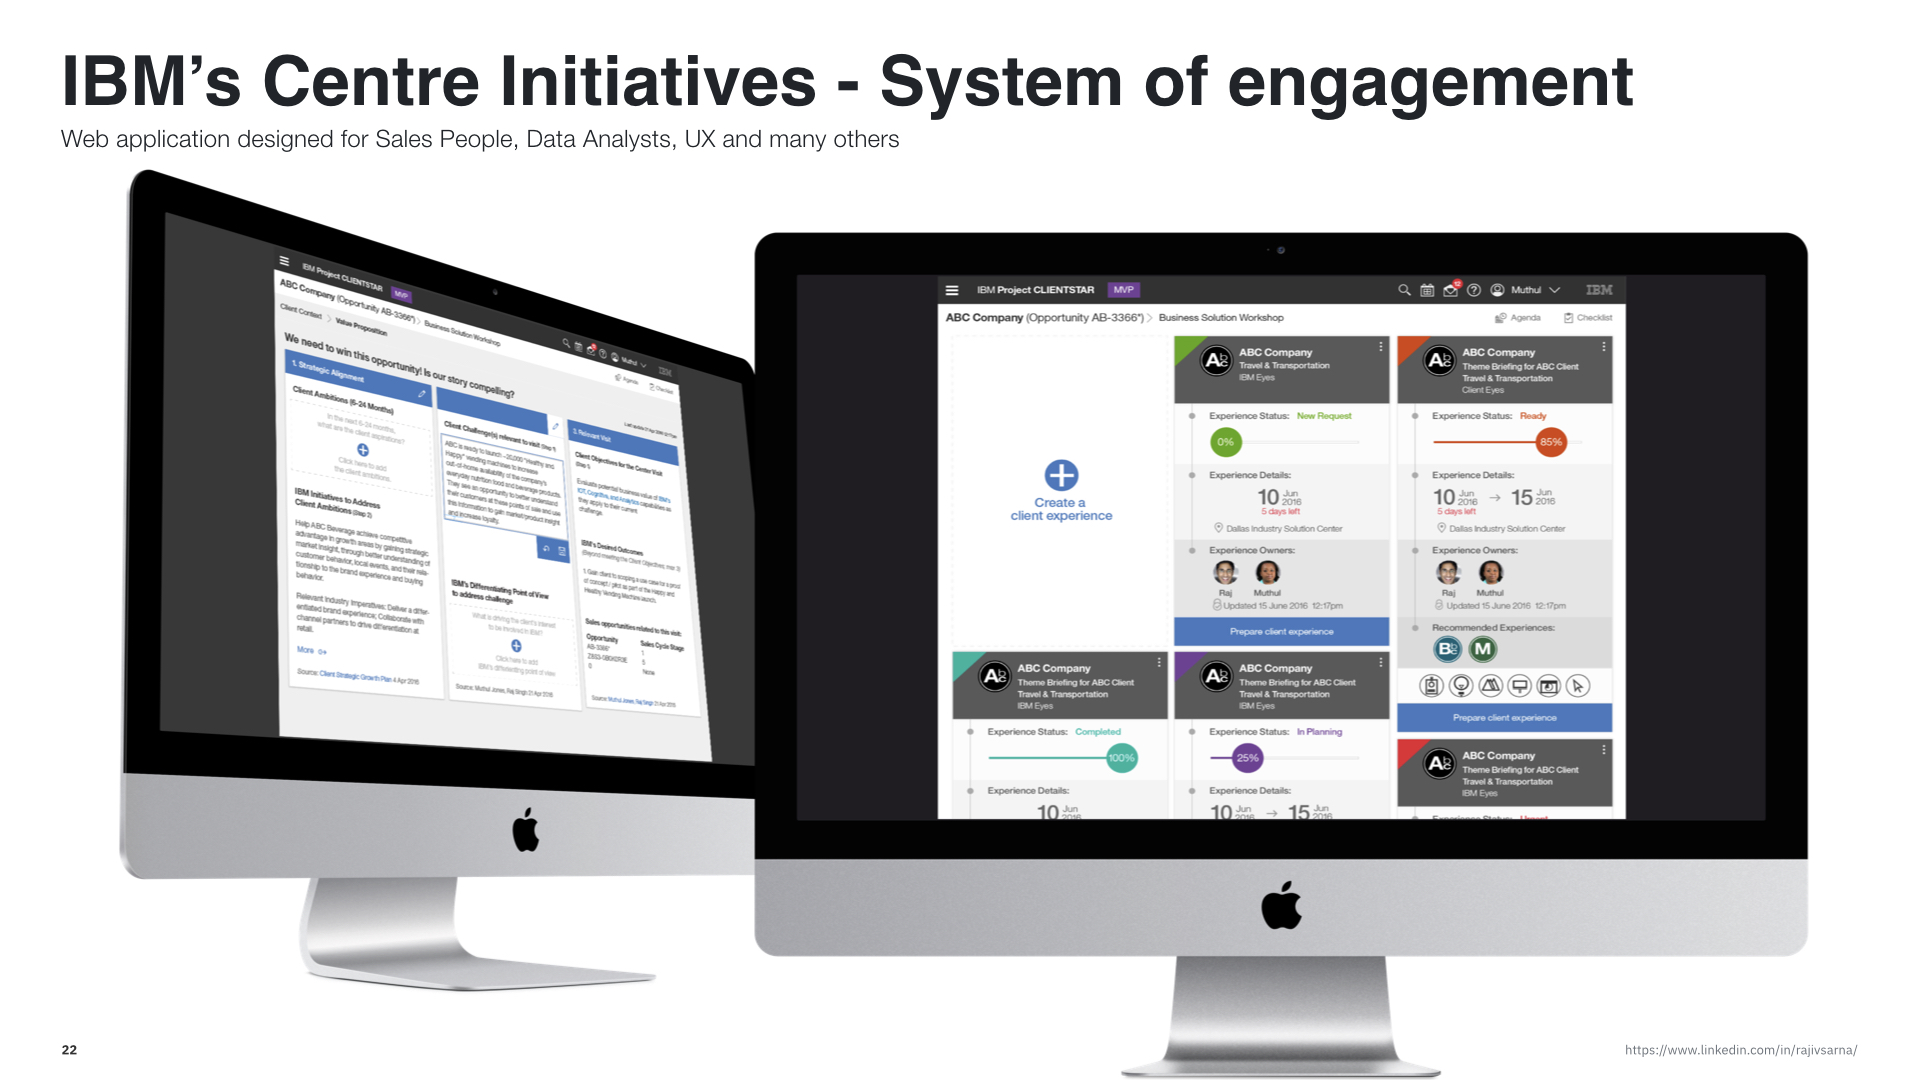 IBM Centre for Initiatives - System of Engagement